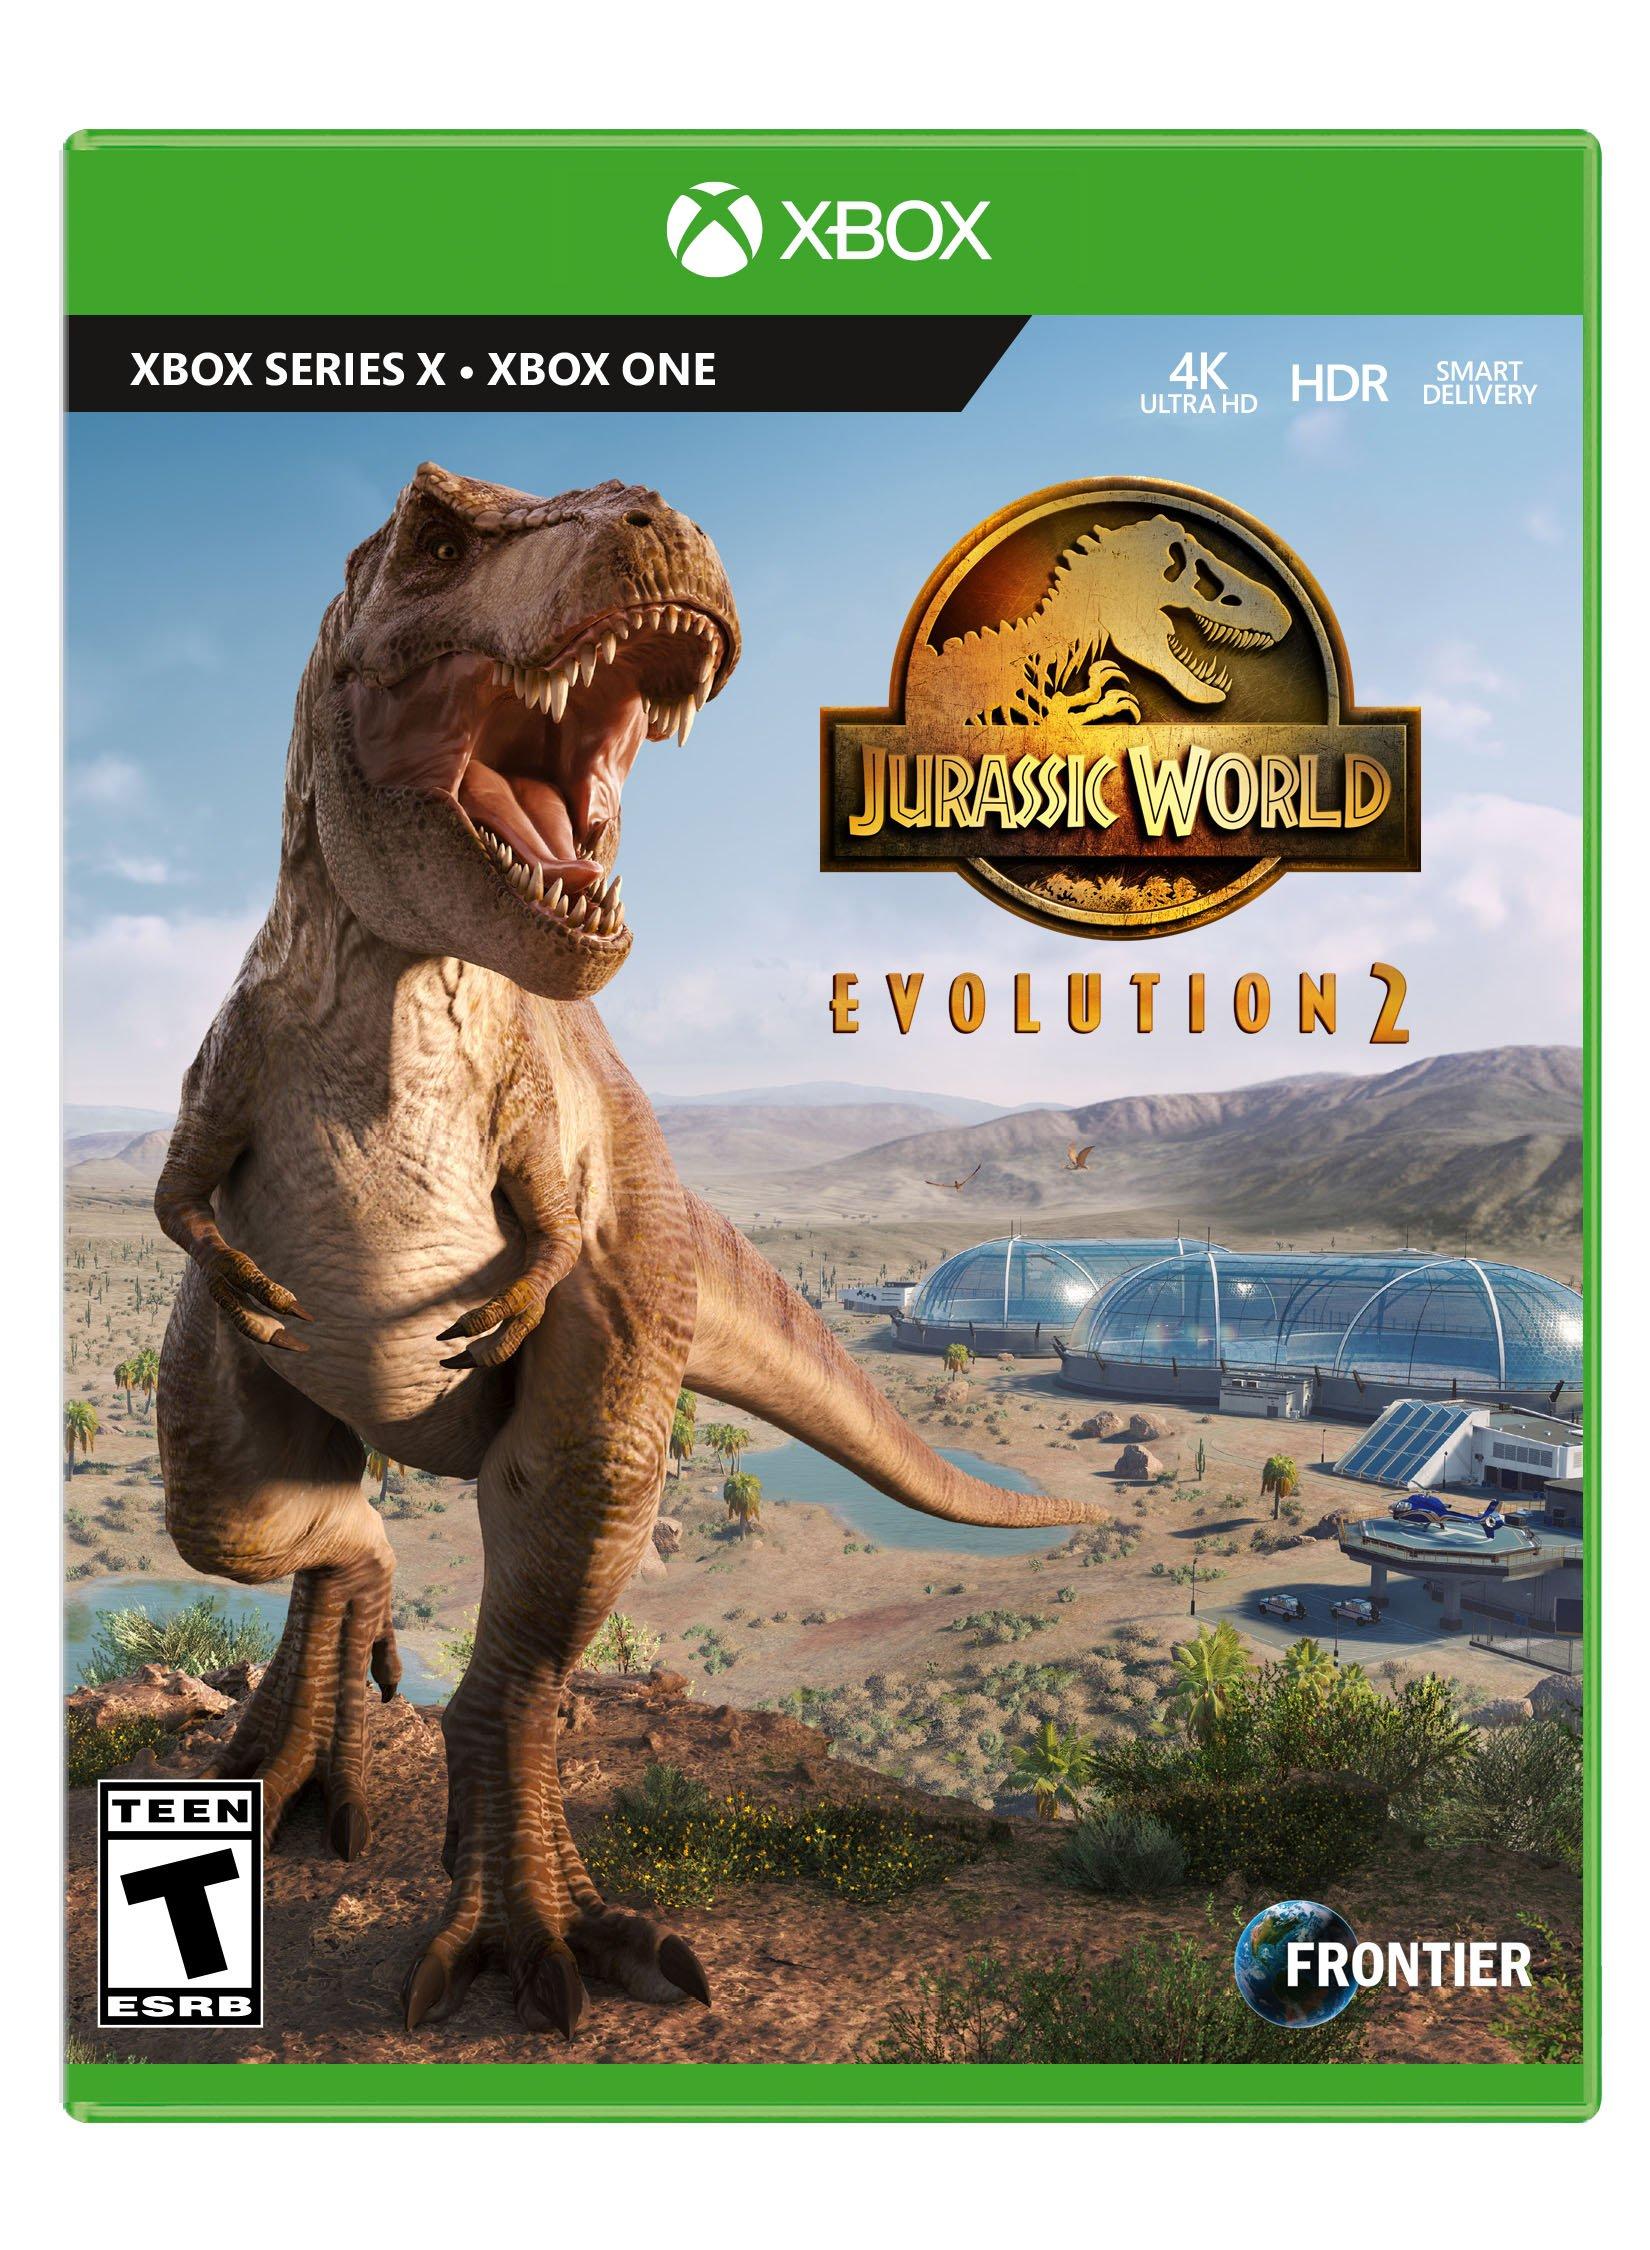 Coming Soon to Xbox Game Pass: Jurassic World Evolution 2, Sniper